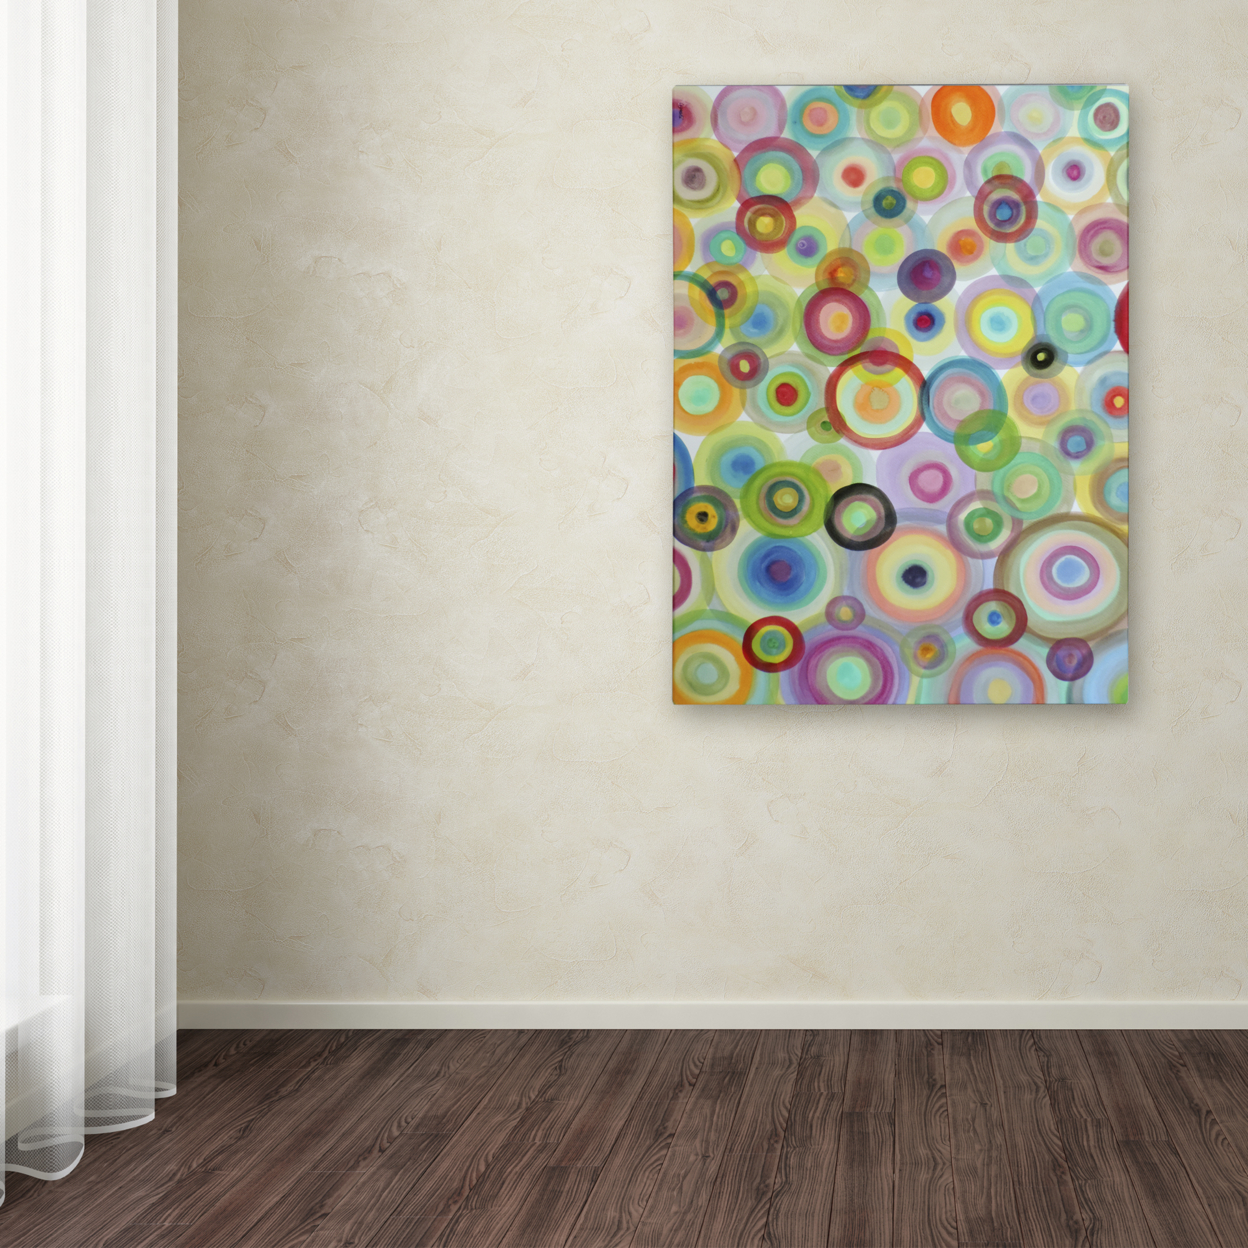 Sylvie Demers 'Bulles' Canvas Wall Art 35 X 47 Inches